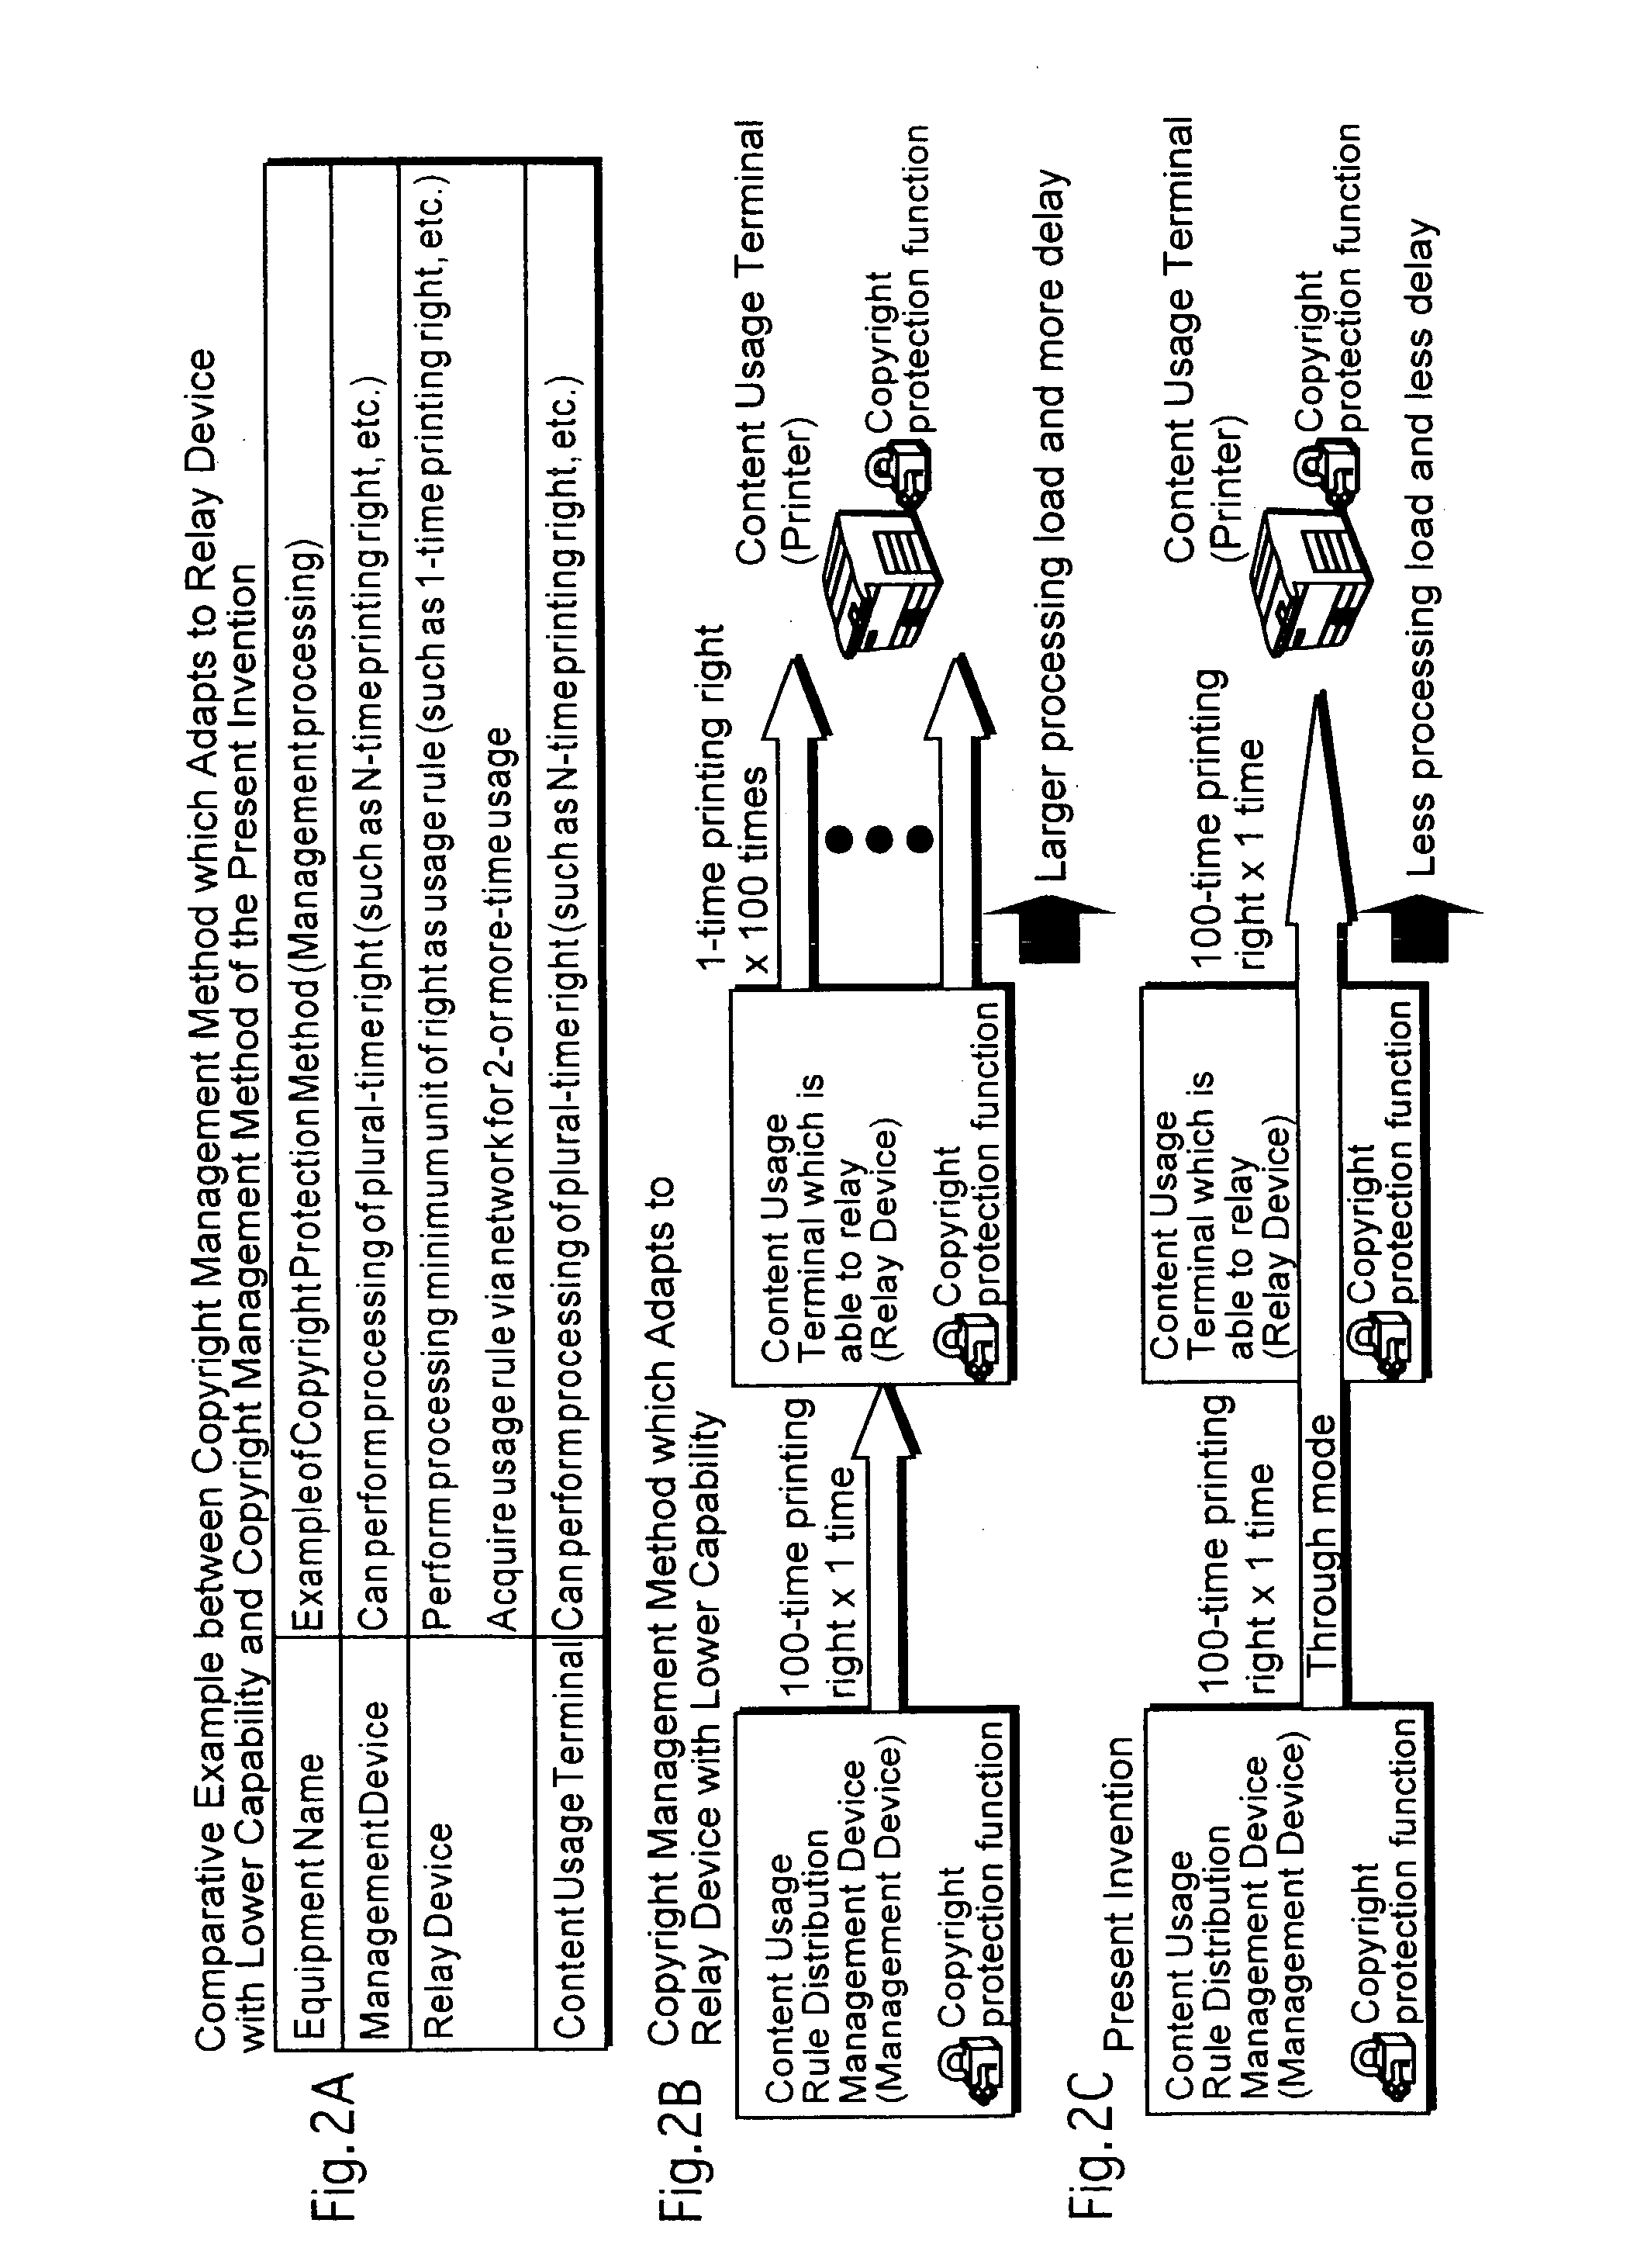 License management system, license management device, relay device and terminal device